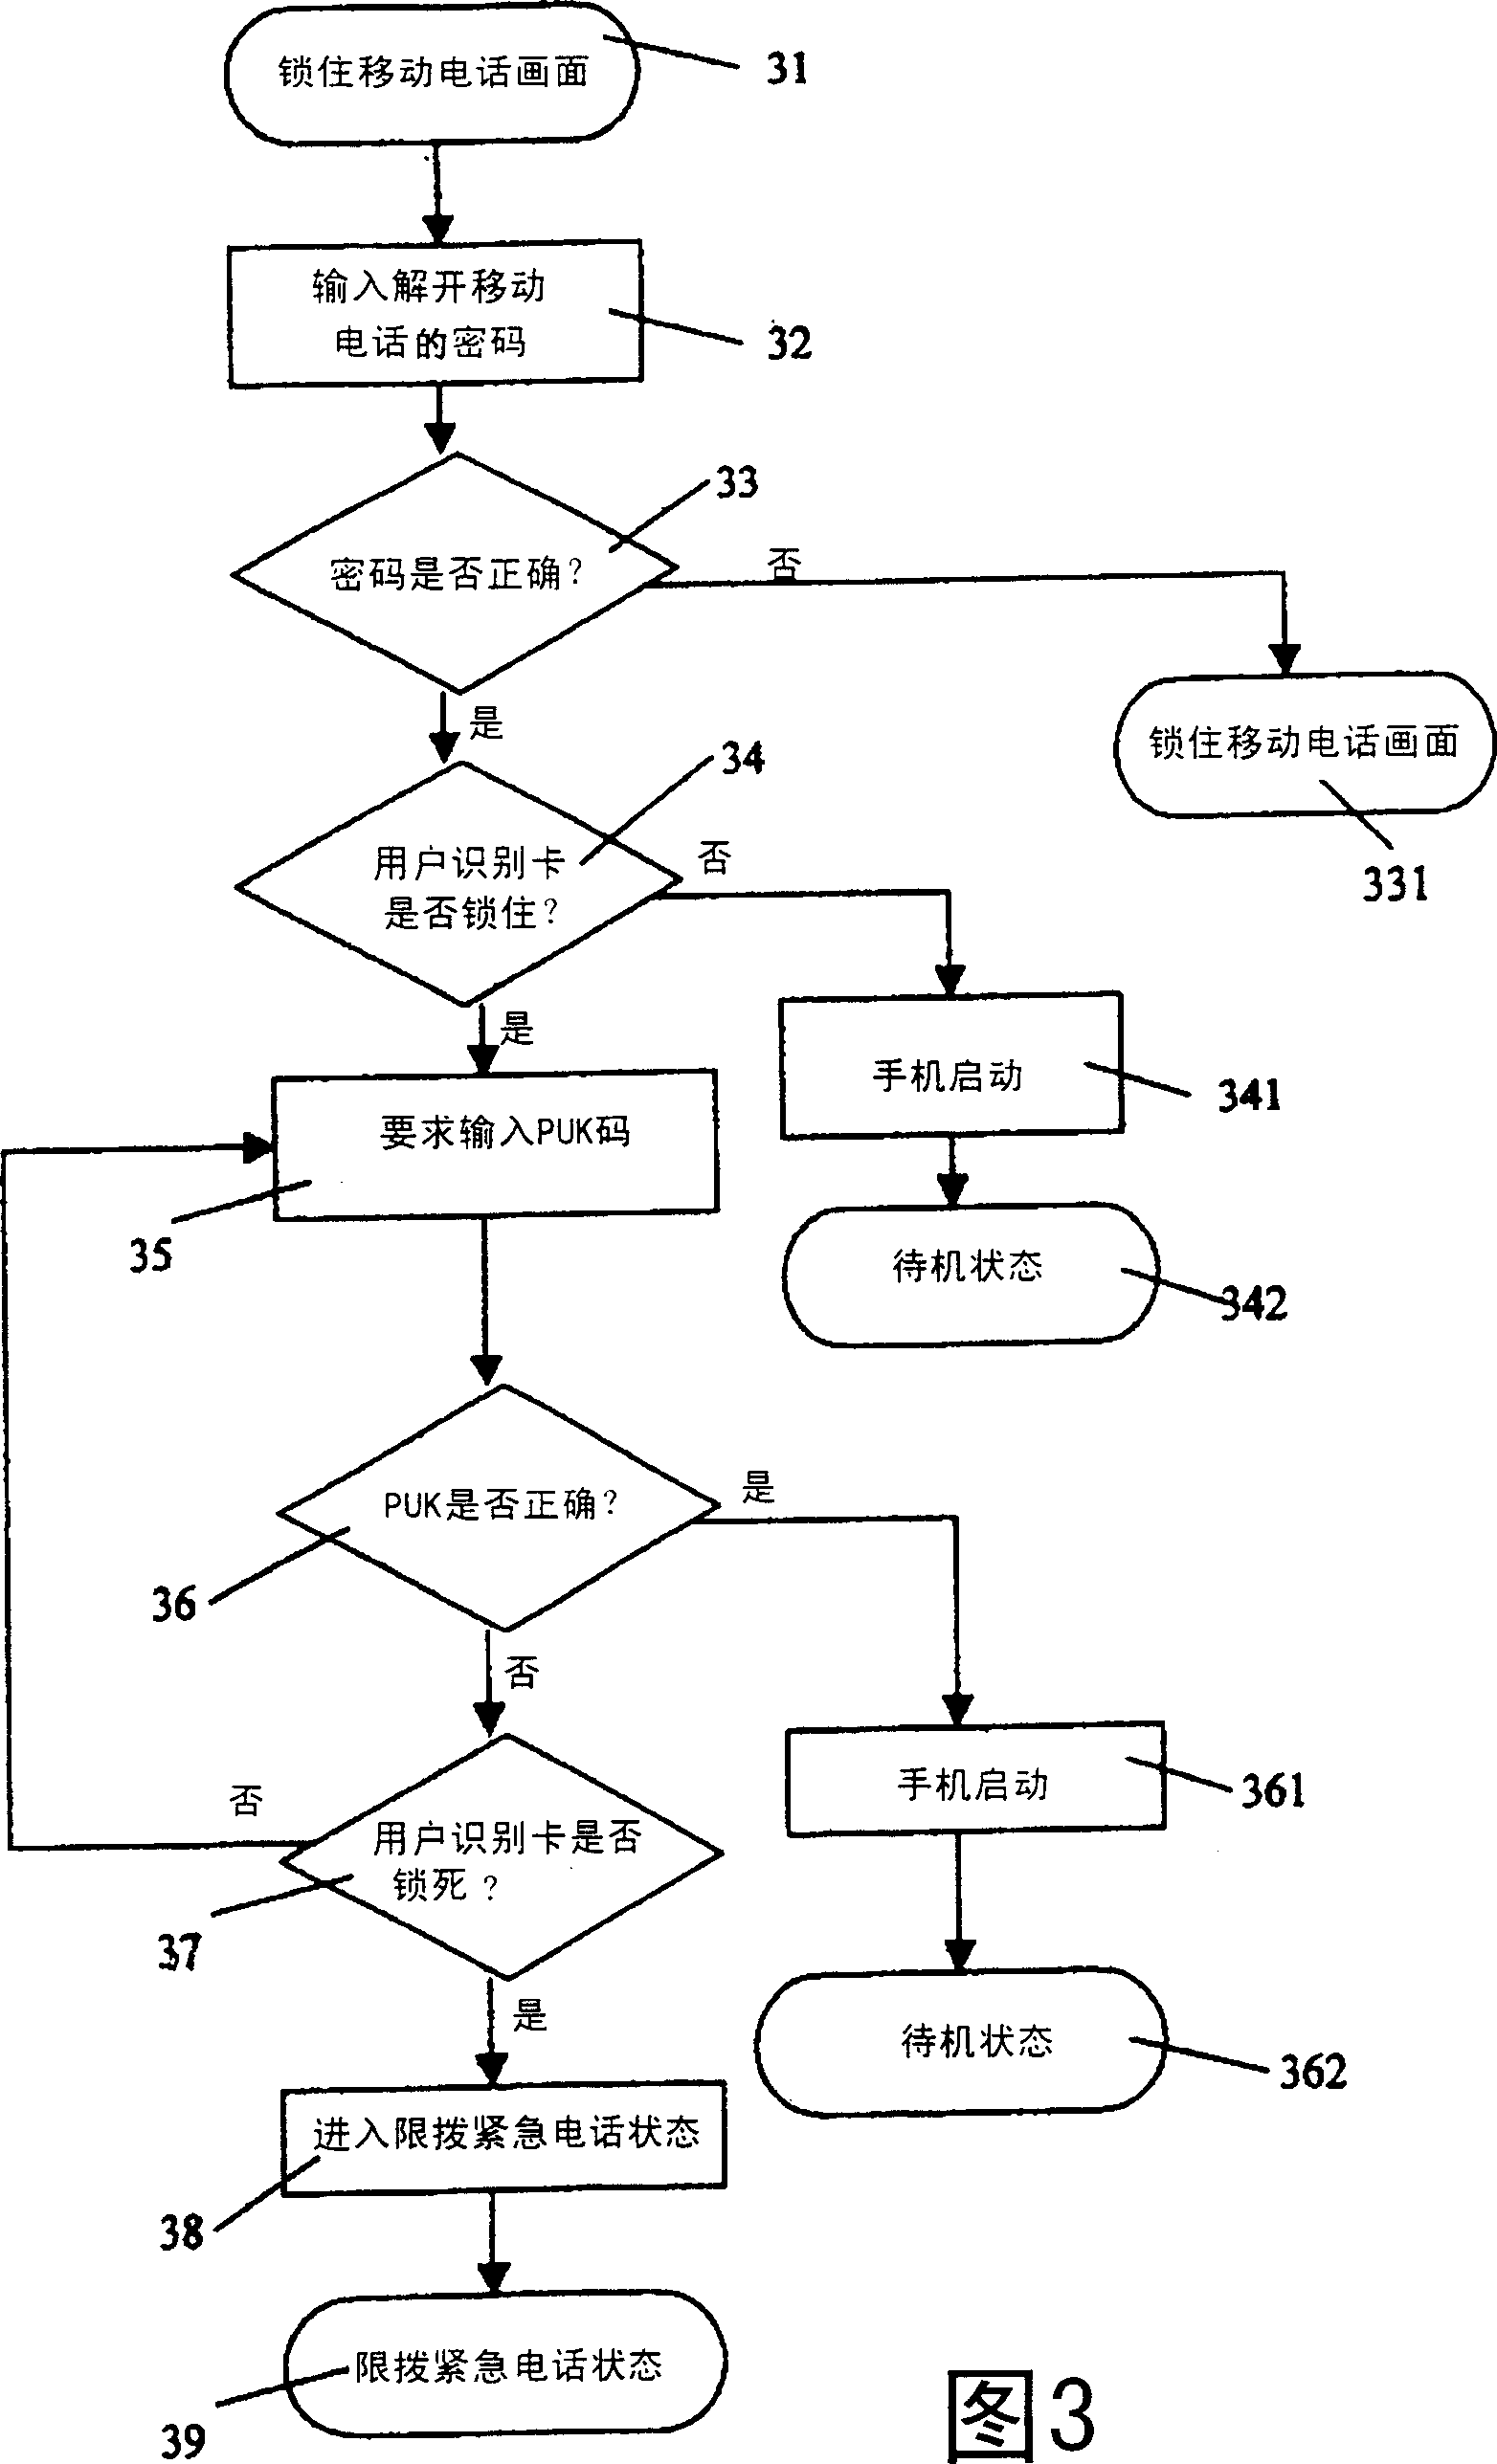 Method for locking user's identification card and mobile telephone by using short message